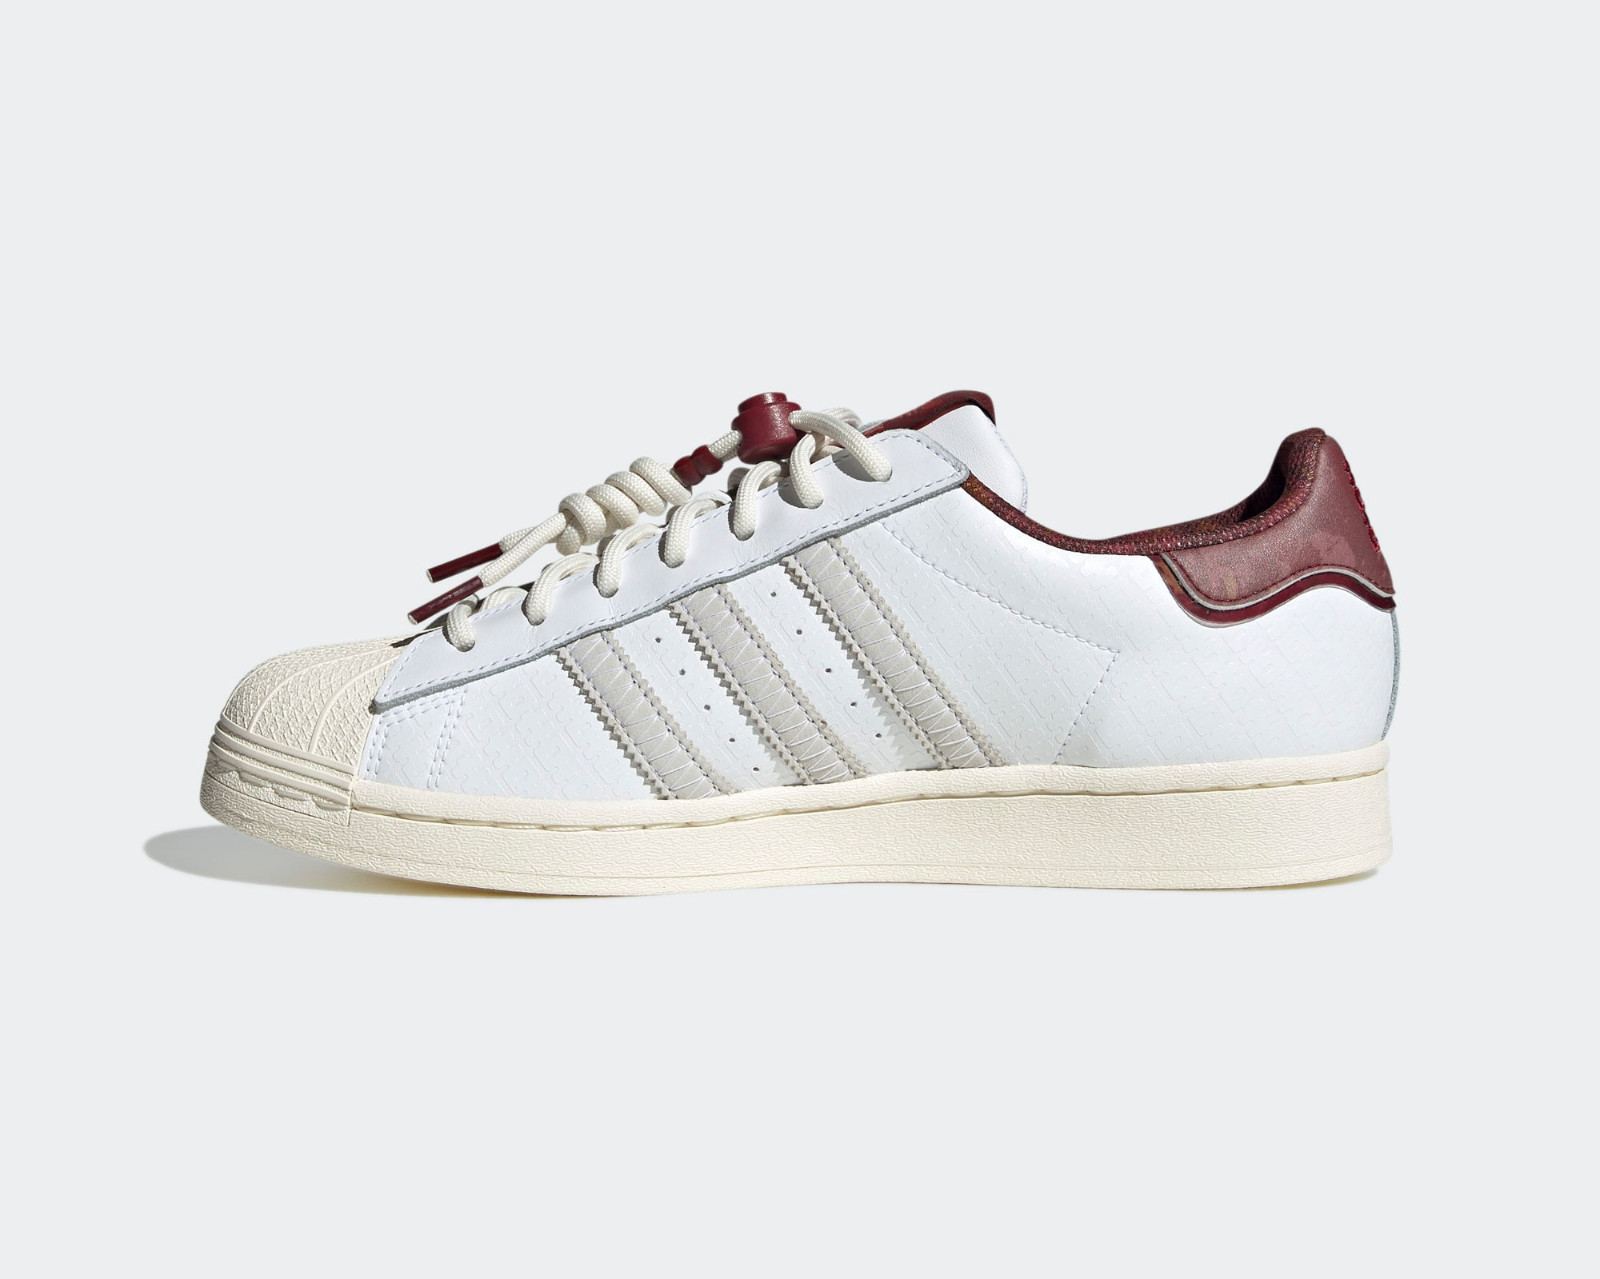 formal crecimiento visión Adidas Originals Superstar Chinese New Year 2023 Cloud White Noble Maroon  IF2577 - Sepsale - adidas online store scam phone number search